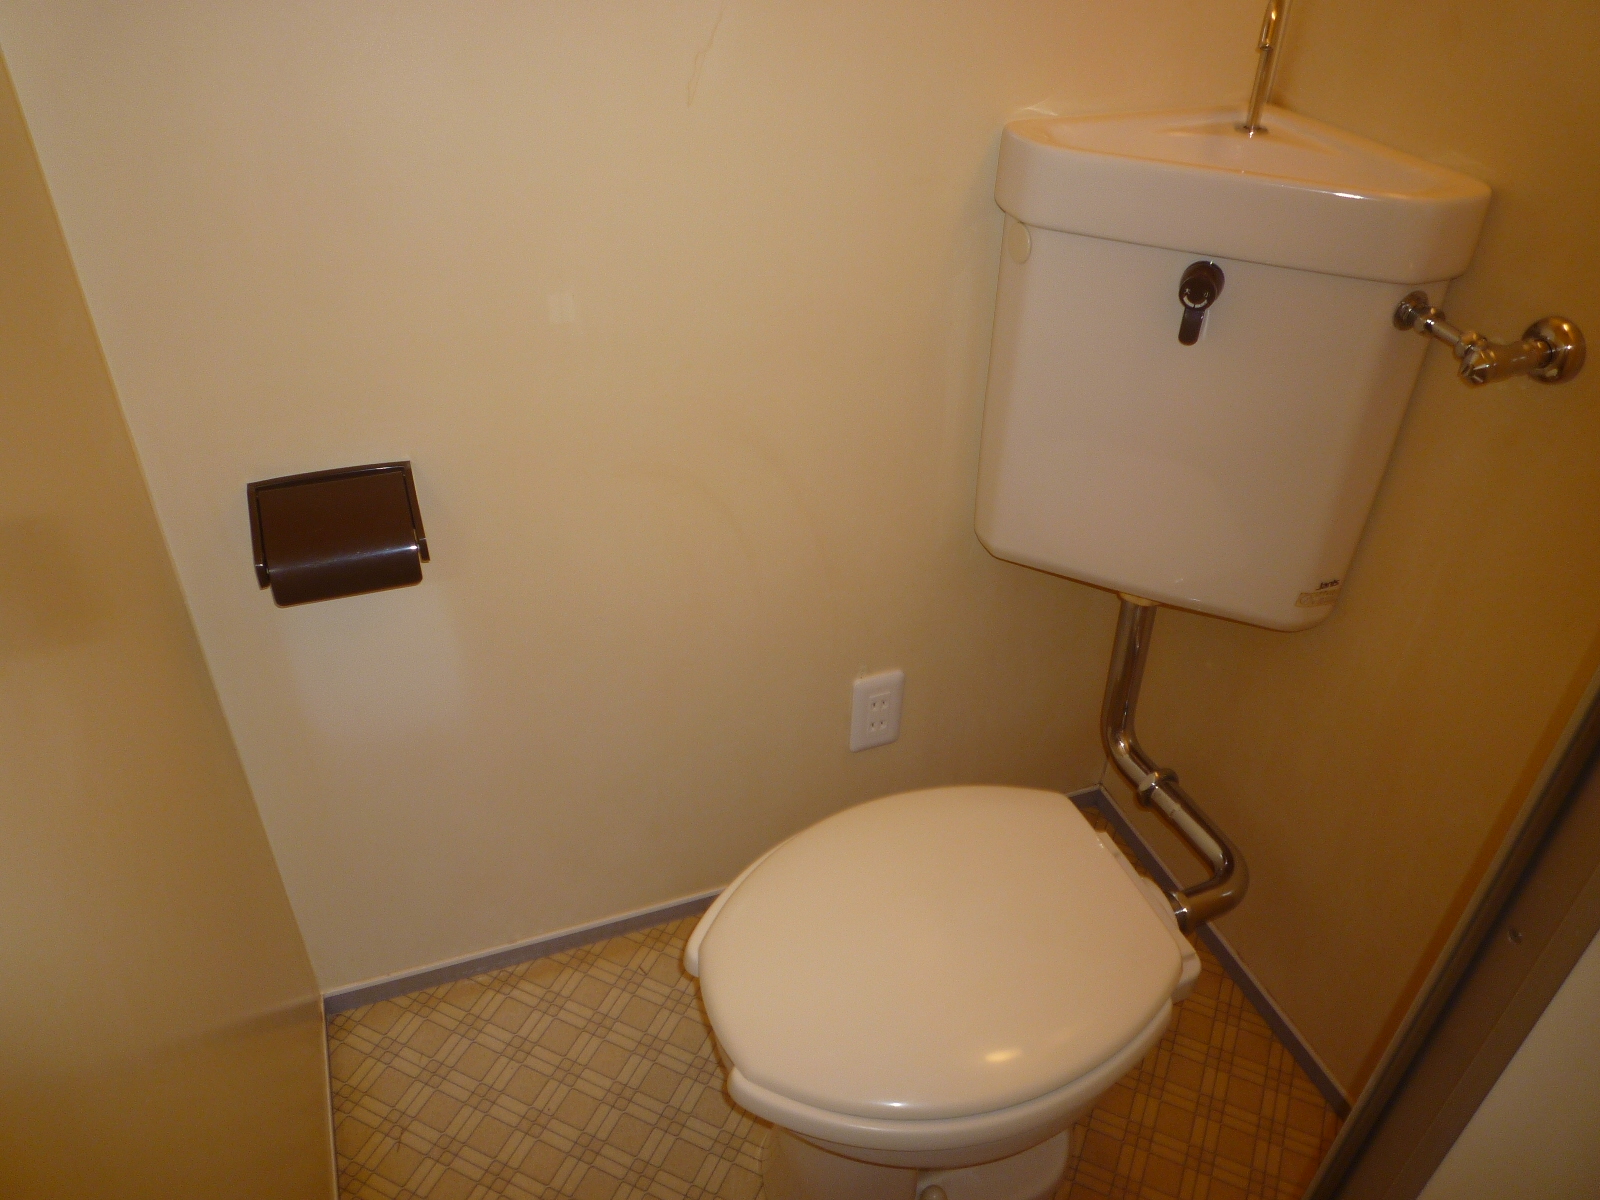 Toilet. Outlet installation completed, It corresponds to the bidet